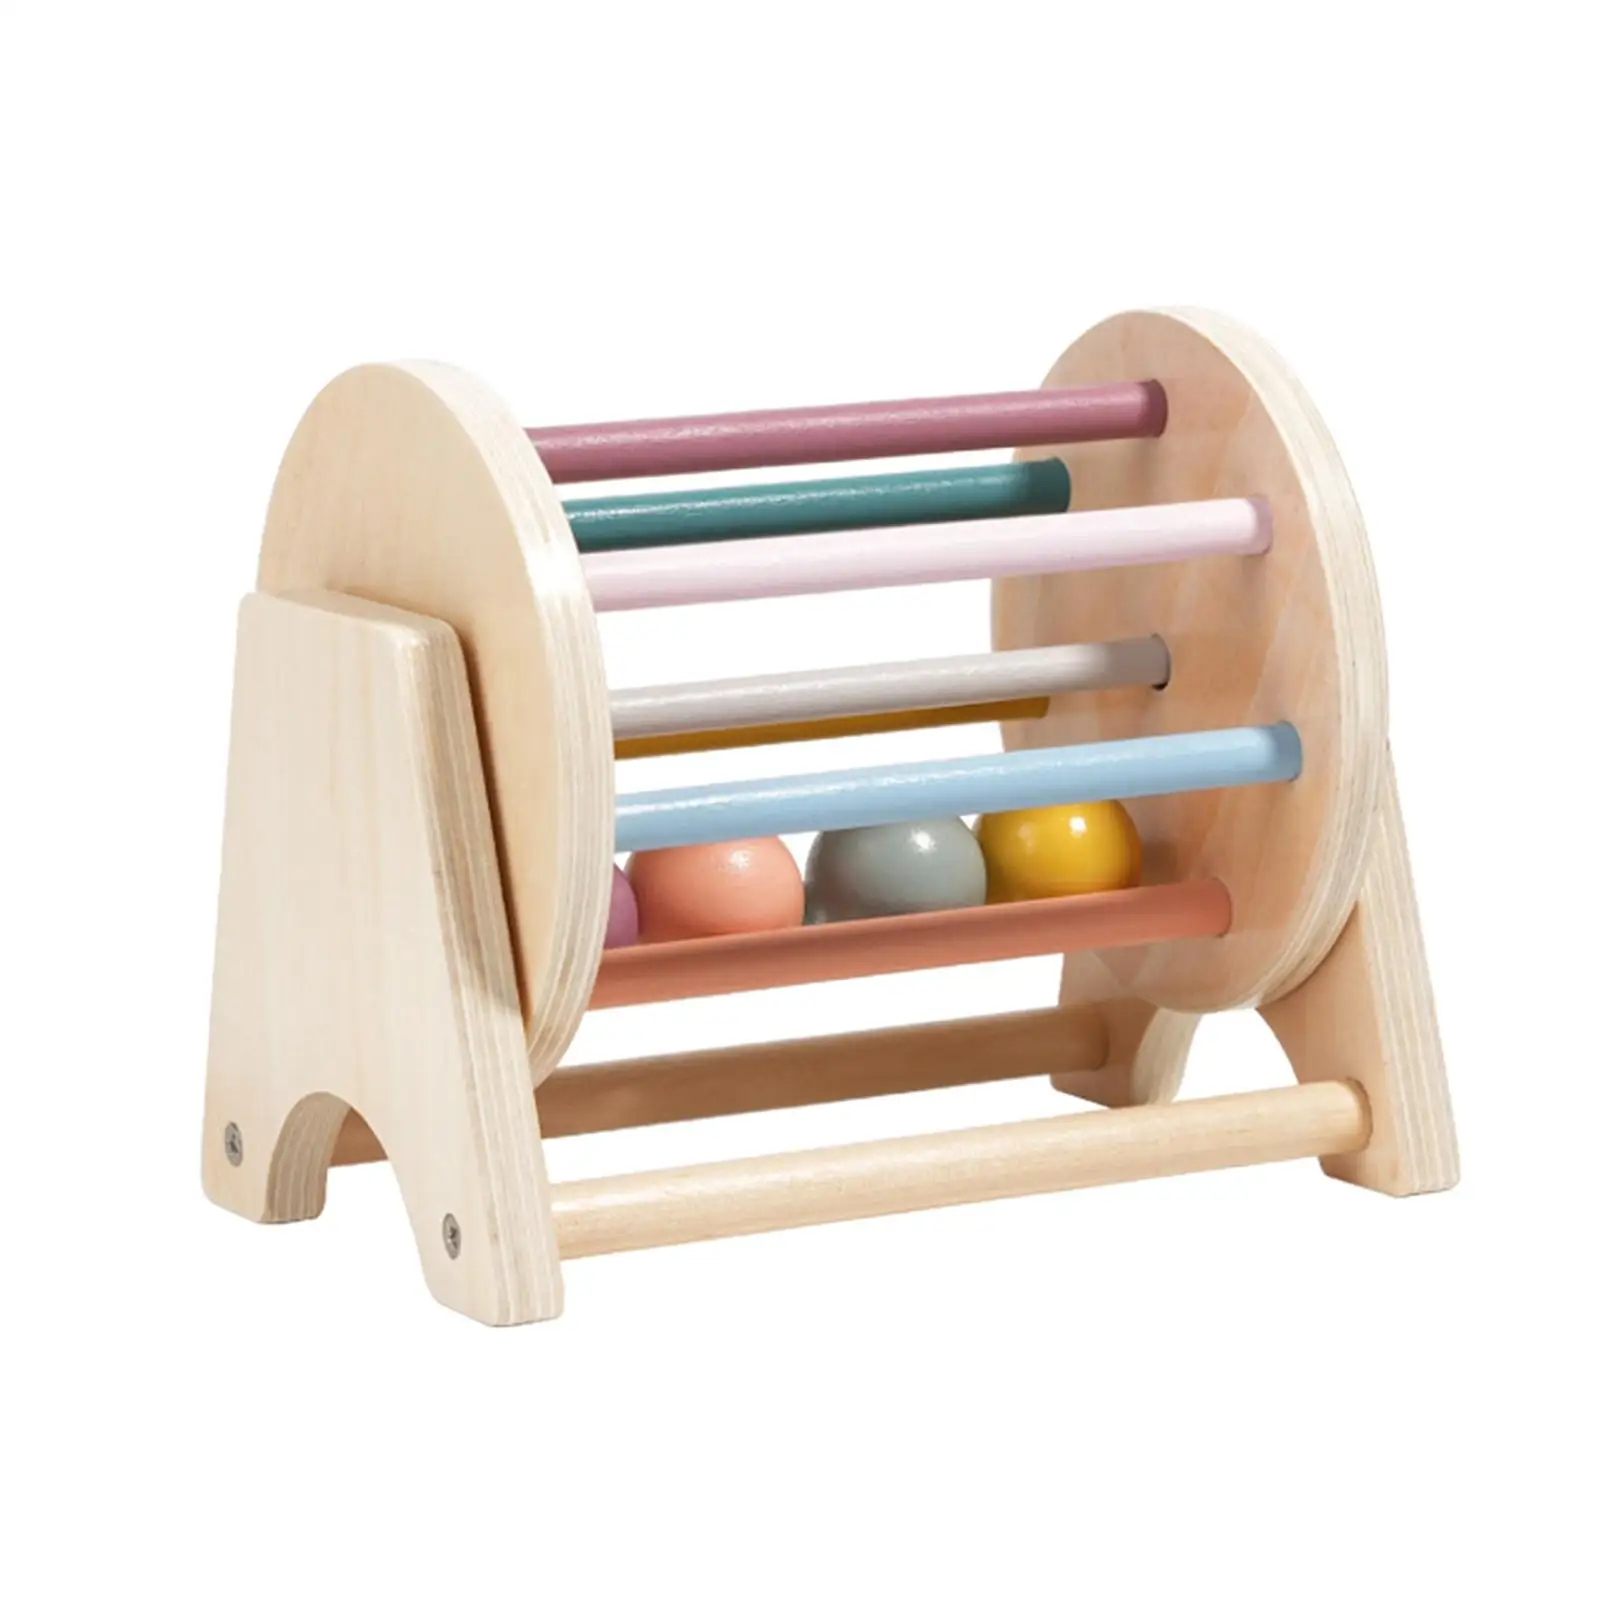 Wooden Rolling Drum Toy Hand Eye Coordination Crawling Toy Wooden Rattle Rolling Toy for Boys Girls Kids Ages 6-12 Month Baby